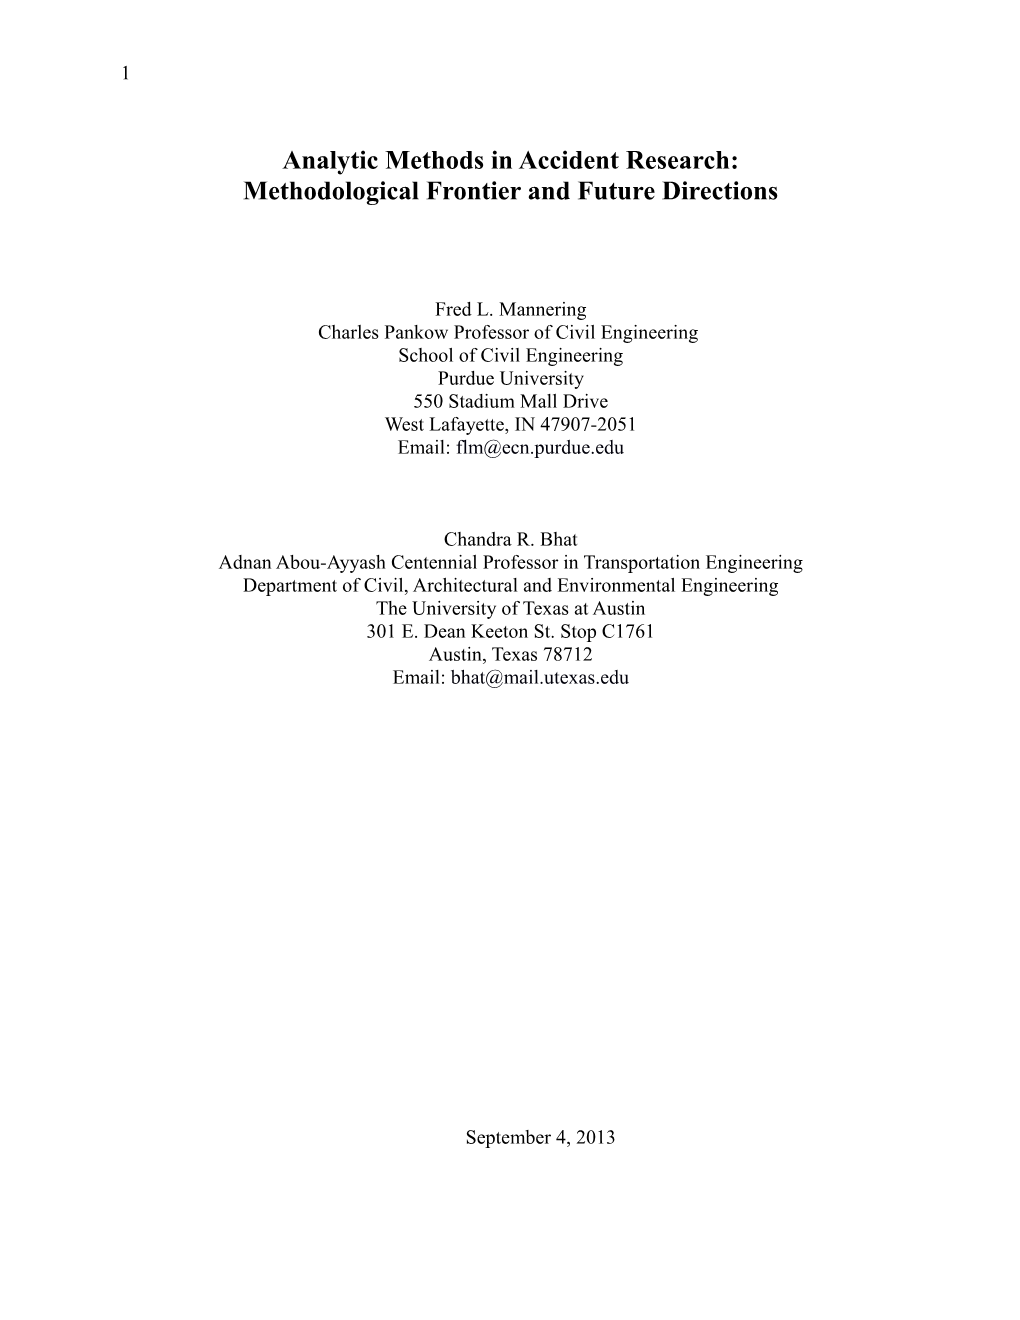 Analytic Methods in Accident Research: Methodological Frontier and Future Directions